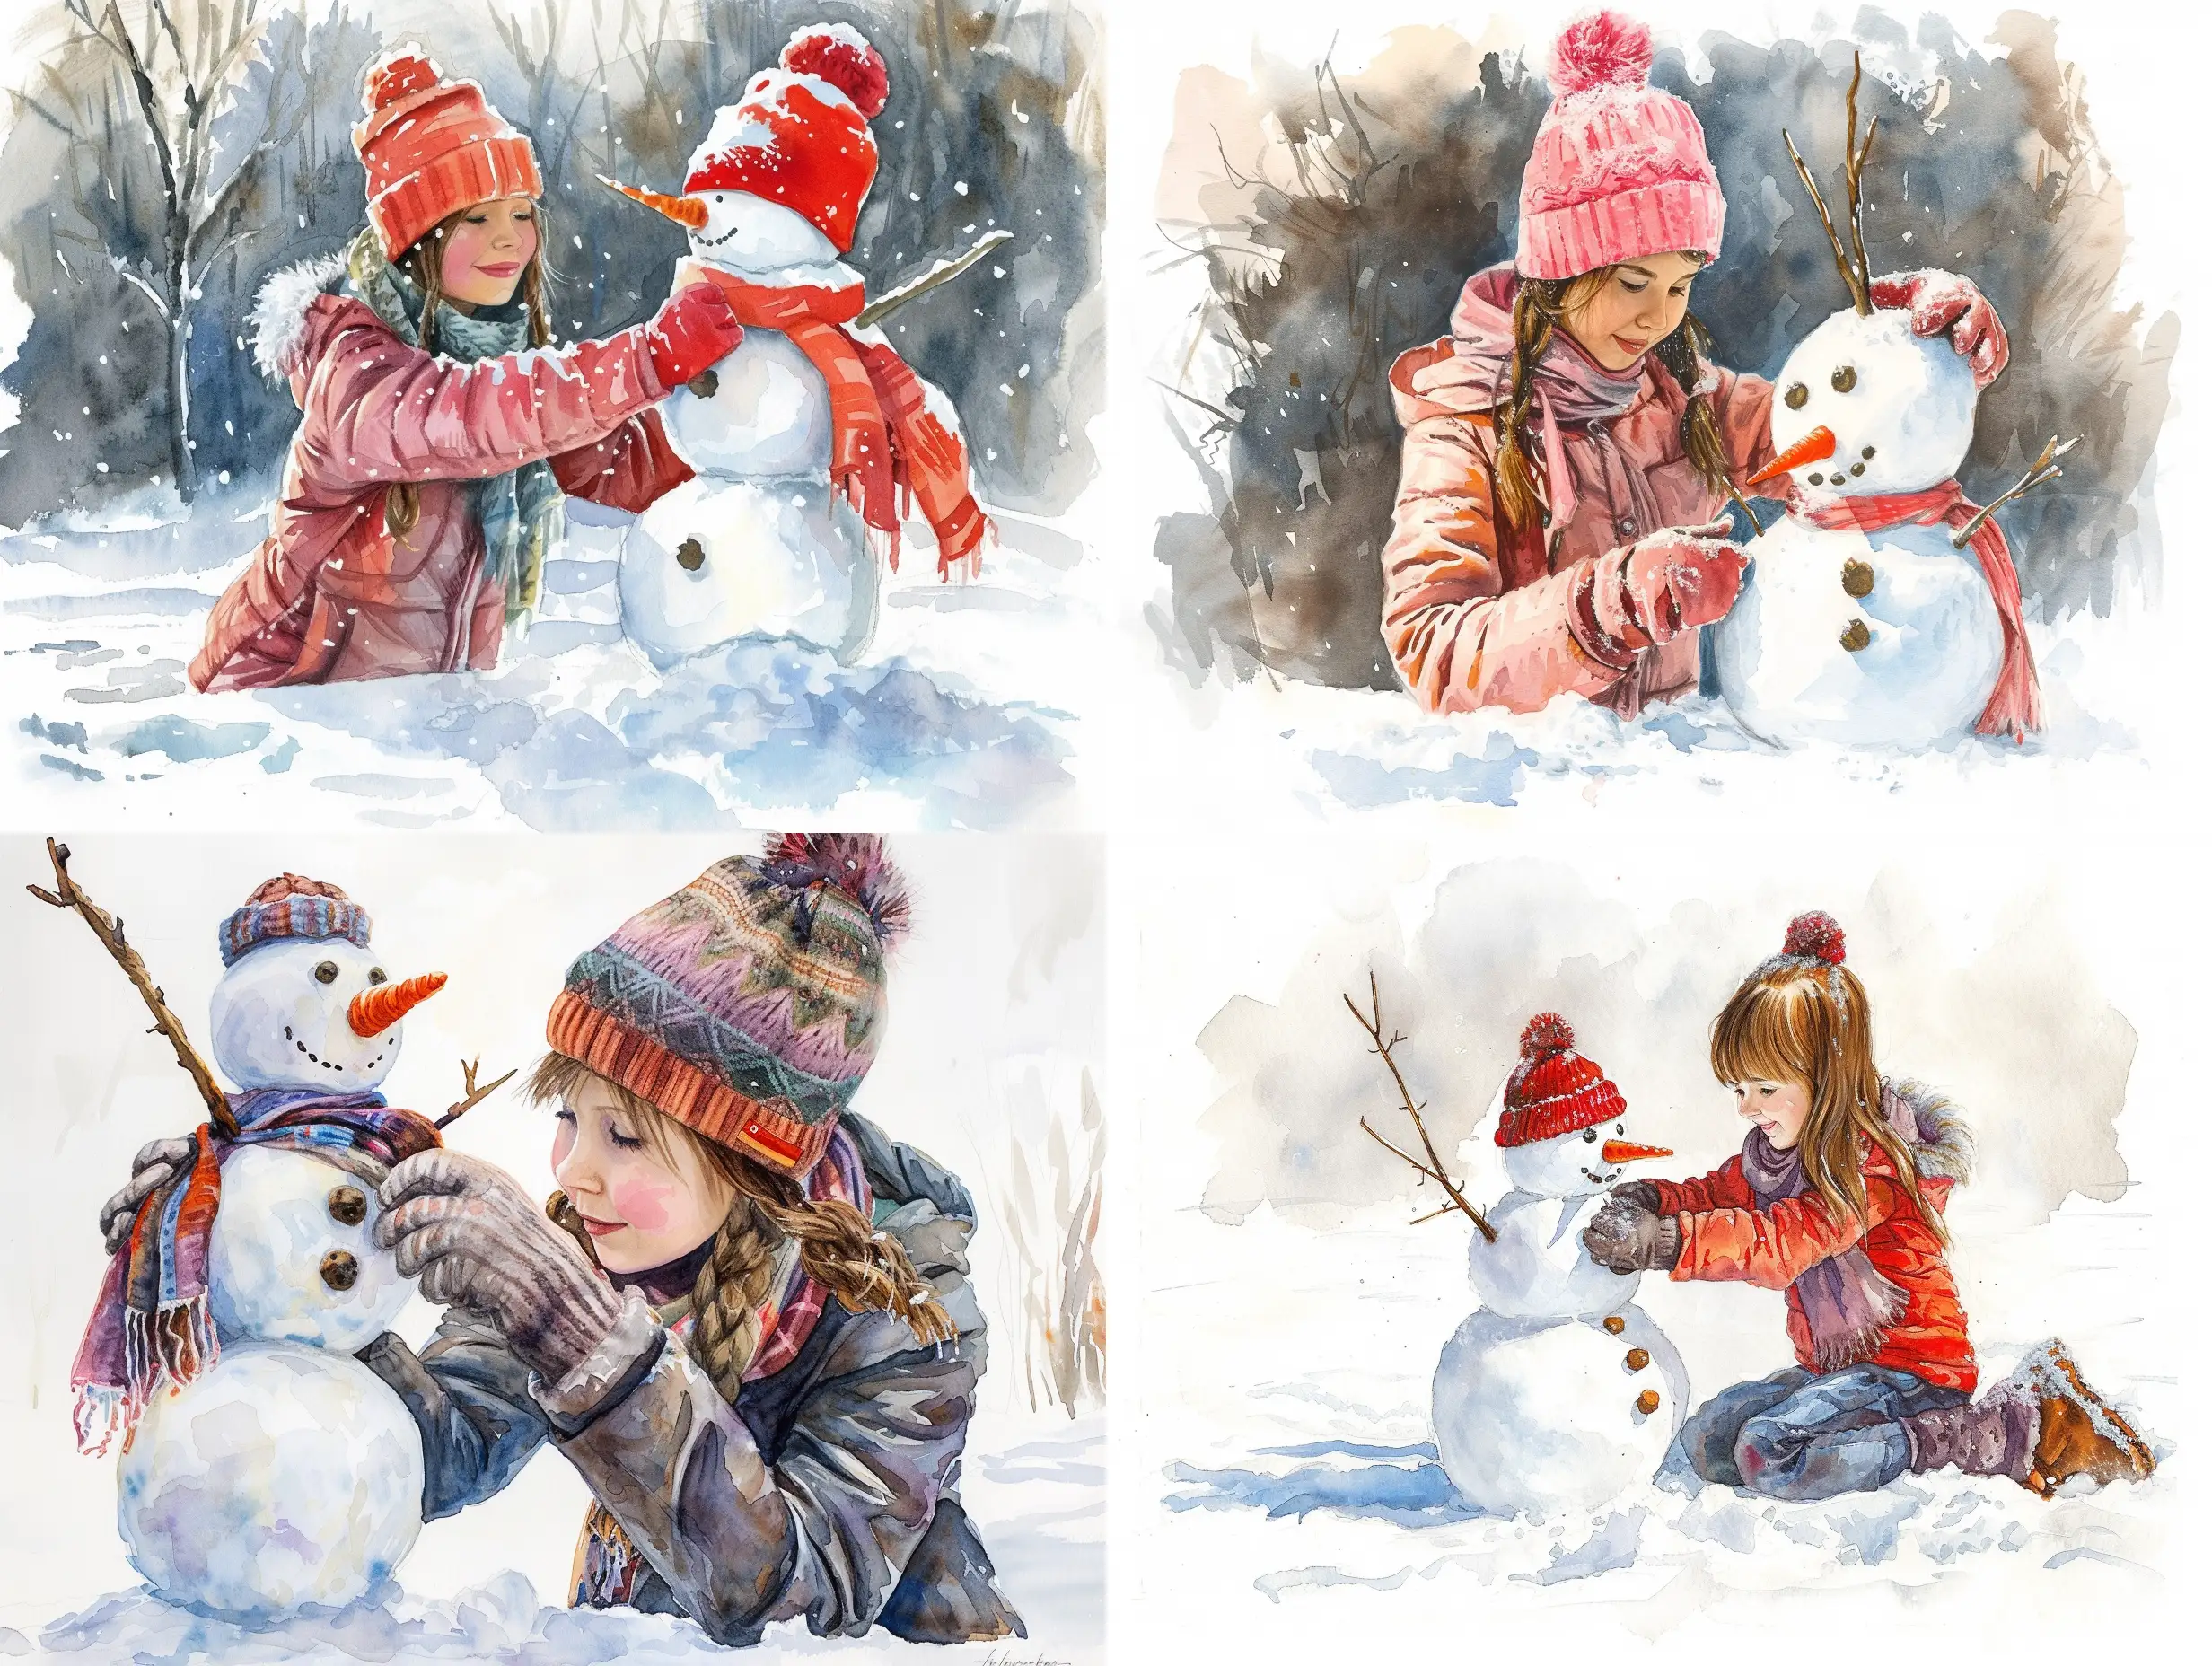 Adorable-Girl-Crafting-a-Snowman-in-a-Whimsical-Watercolor-Artwork